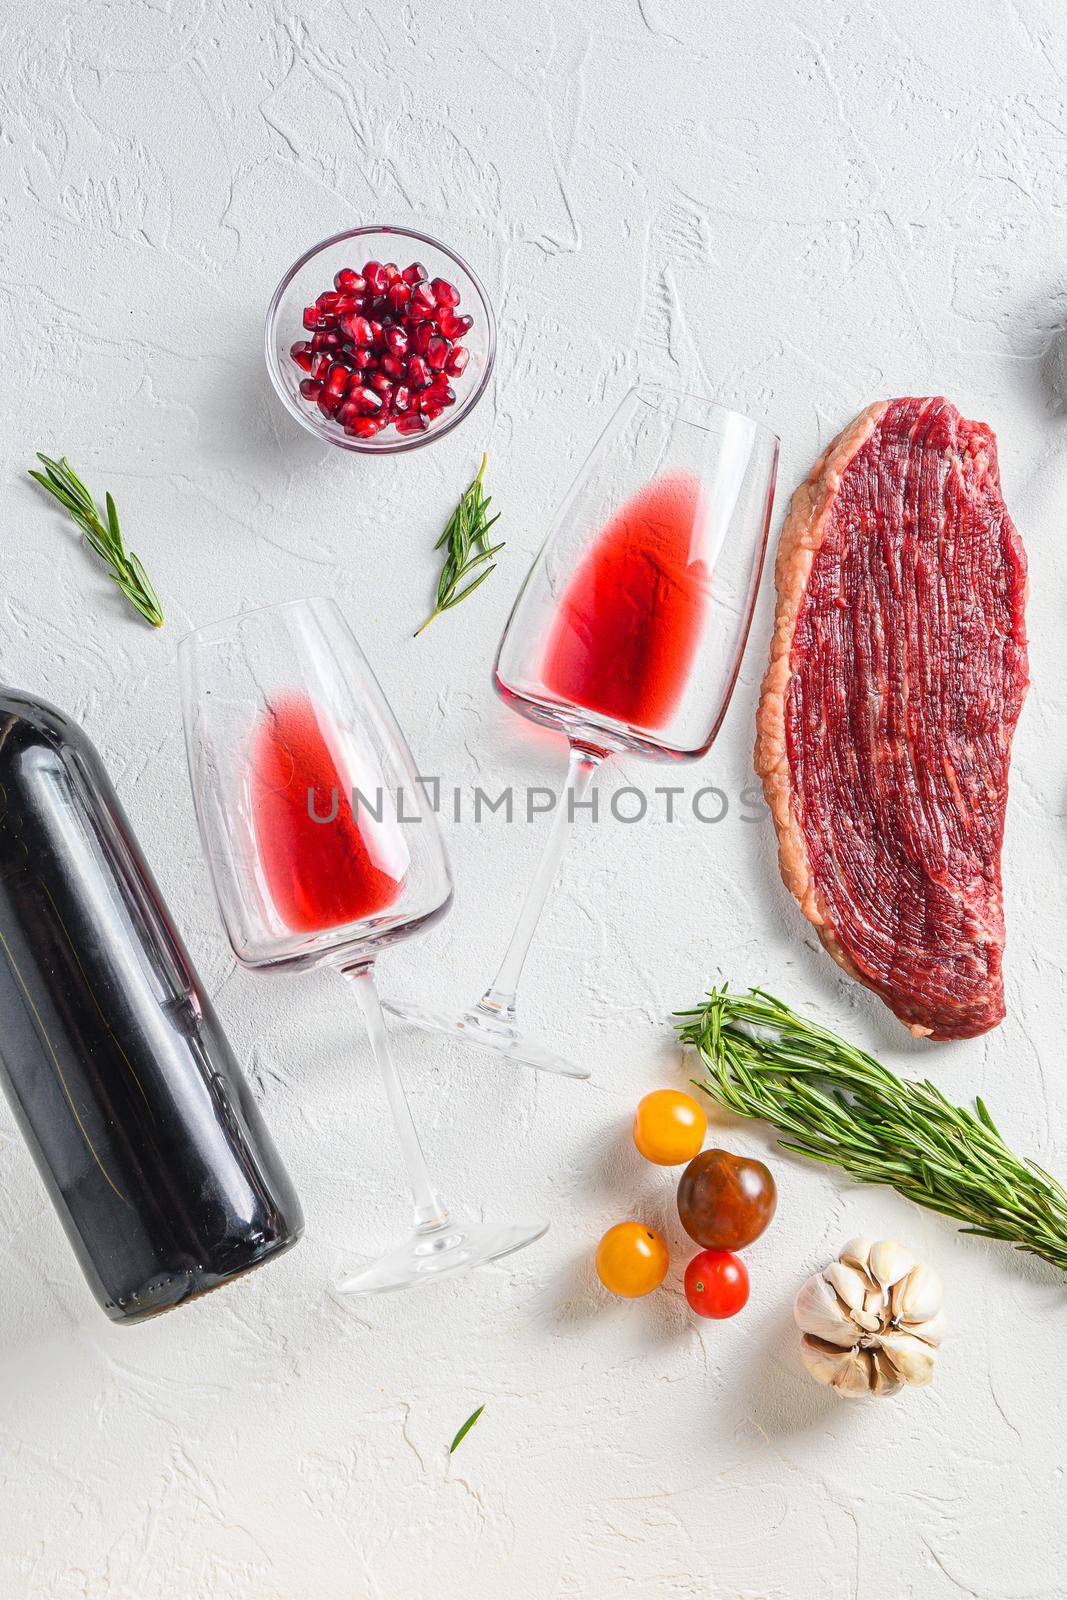 Two glasses of red wine near bottle and beef steaks over white concrete background, top view